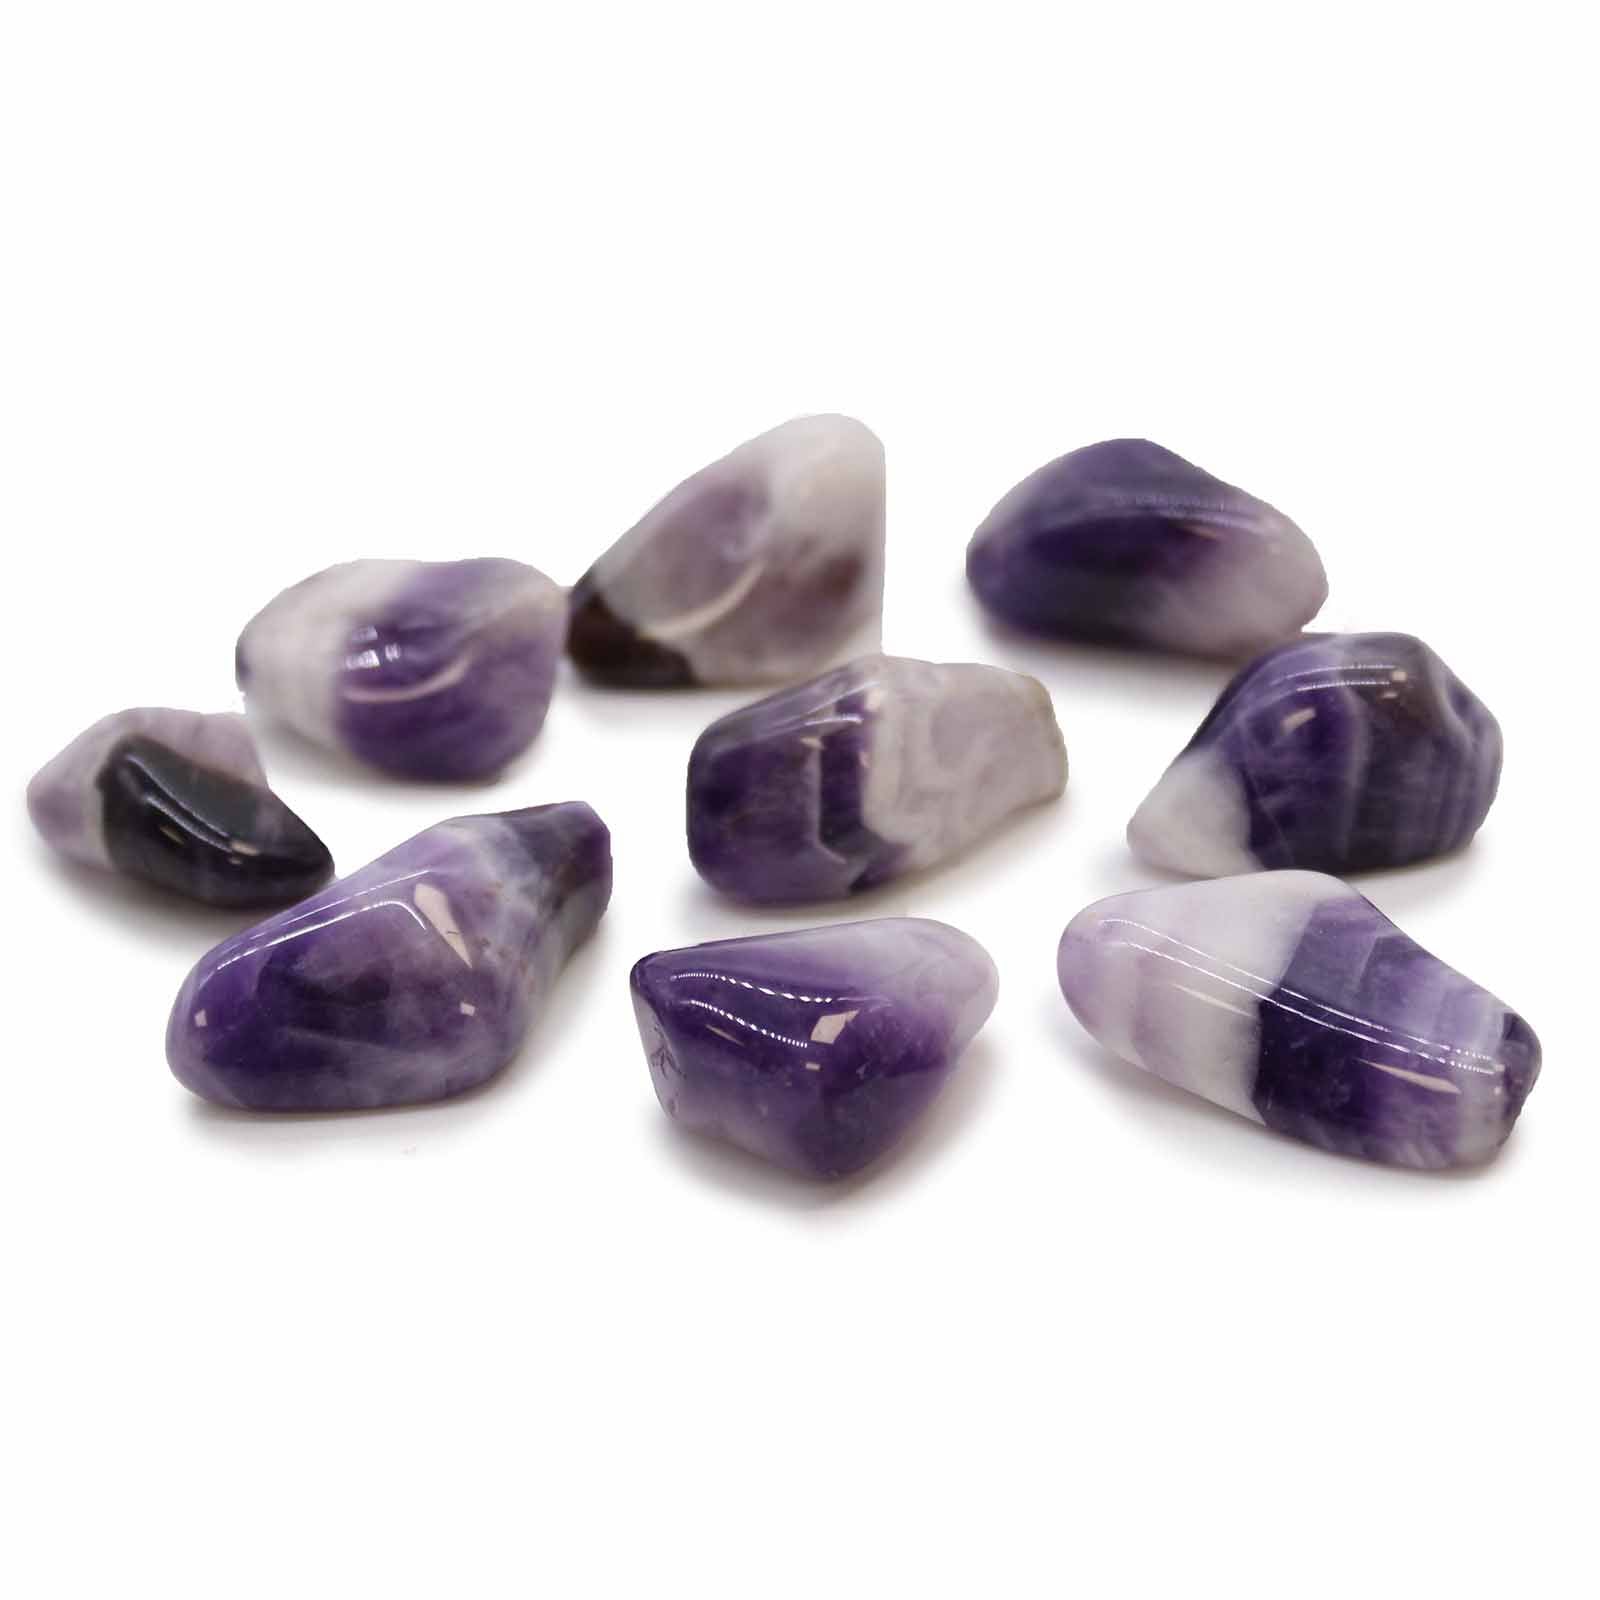 View L Tumble Stones Amethyst Banded Grade B information